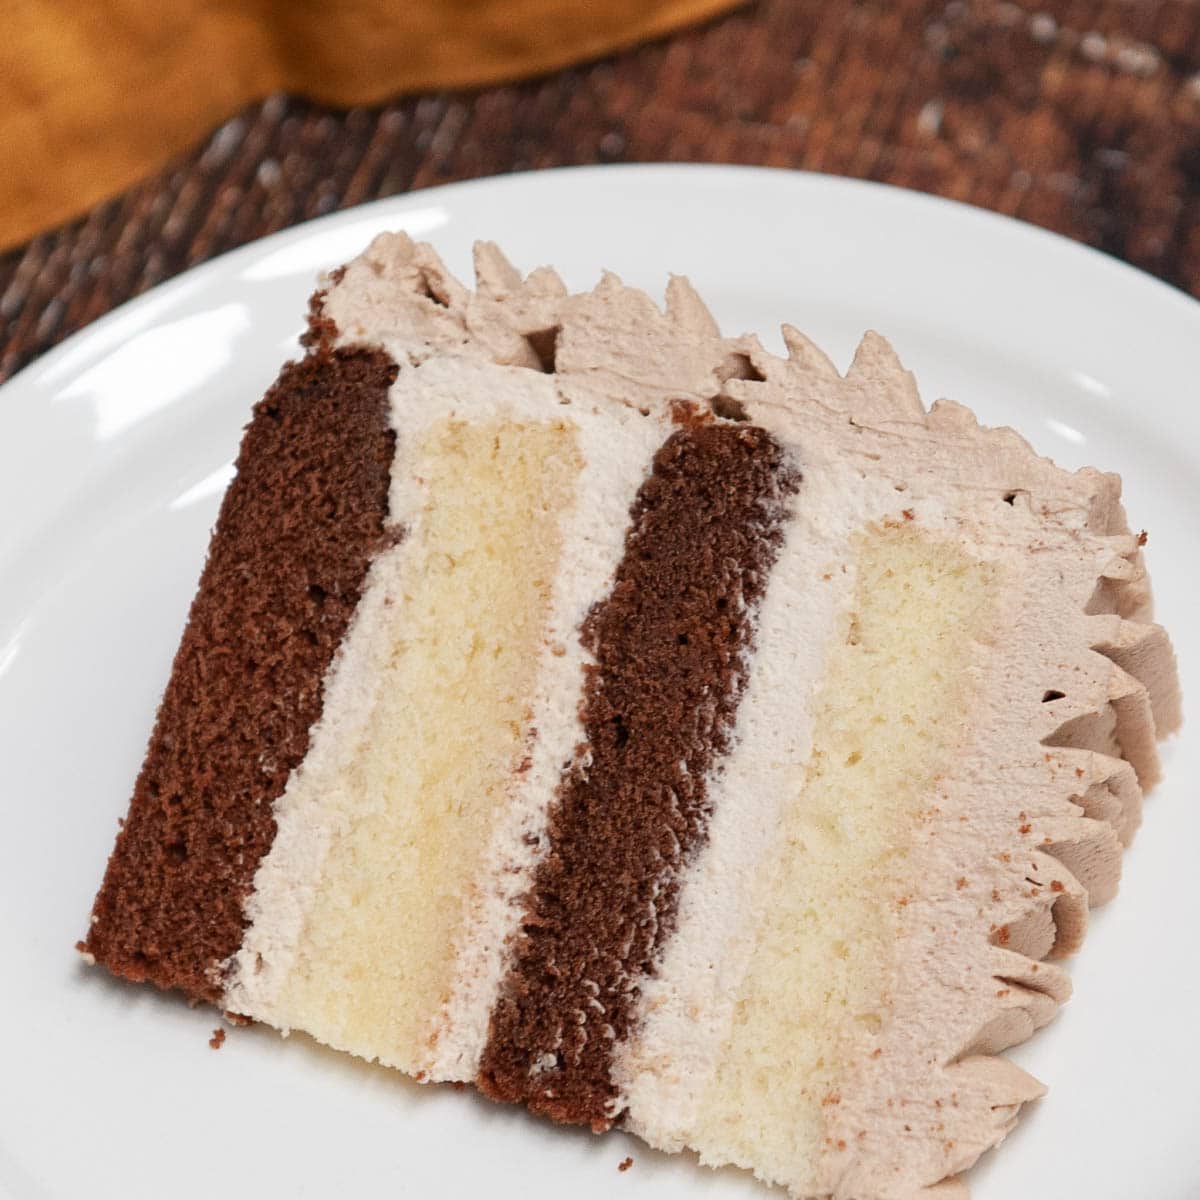 chocolate and vanilla cake slice with chocolate whipped cream on a white plate